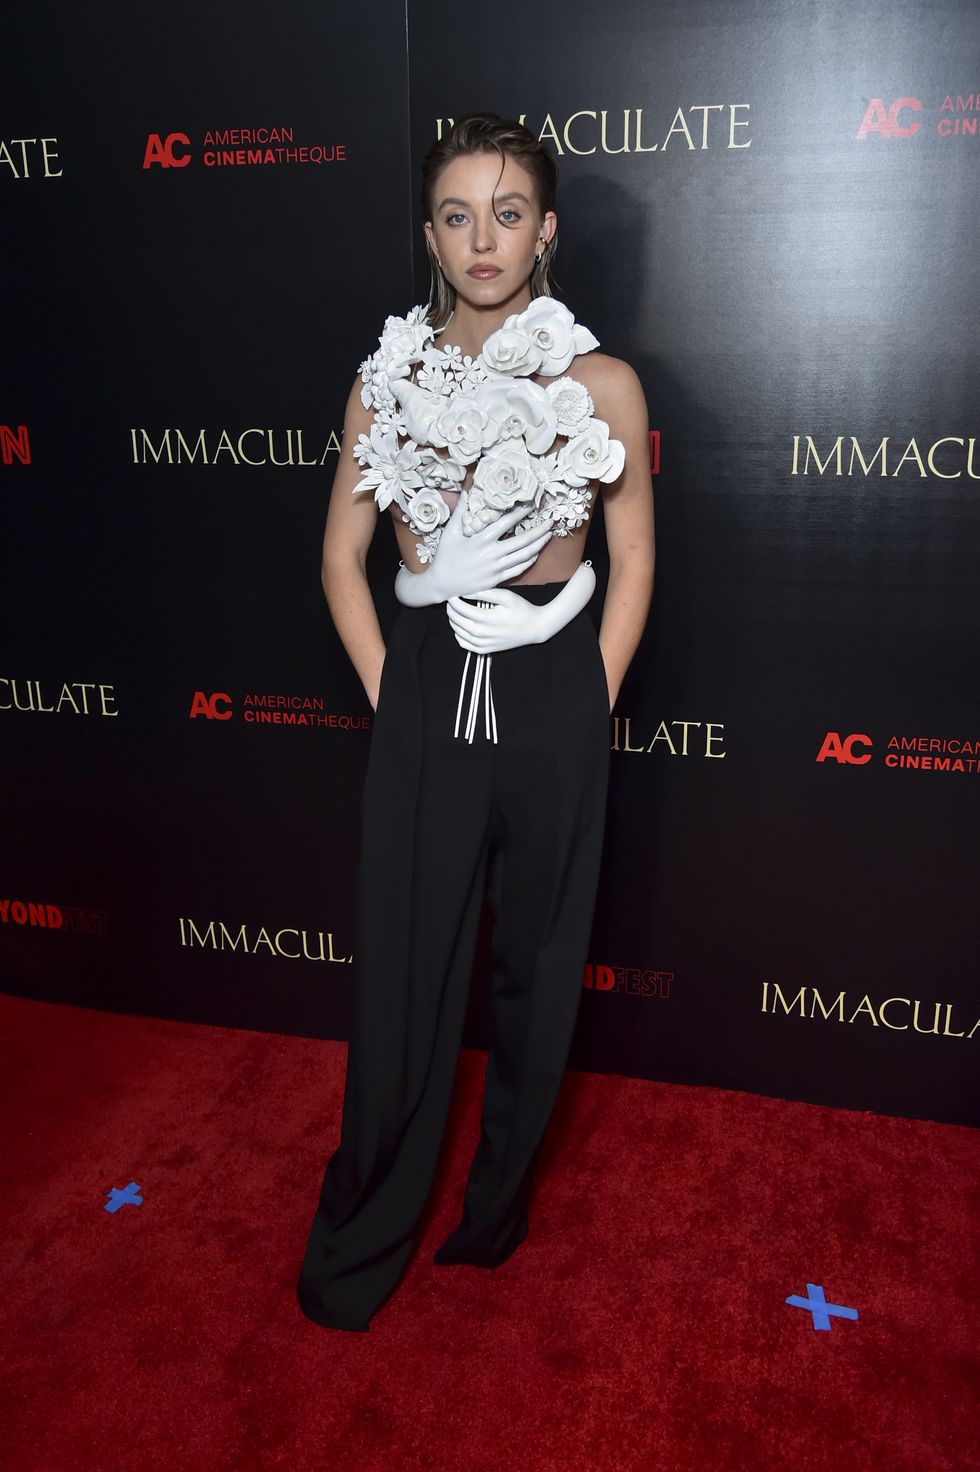 immaculate los angeles premiere arrivals